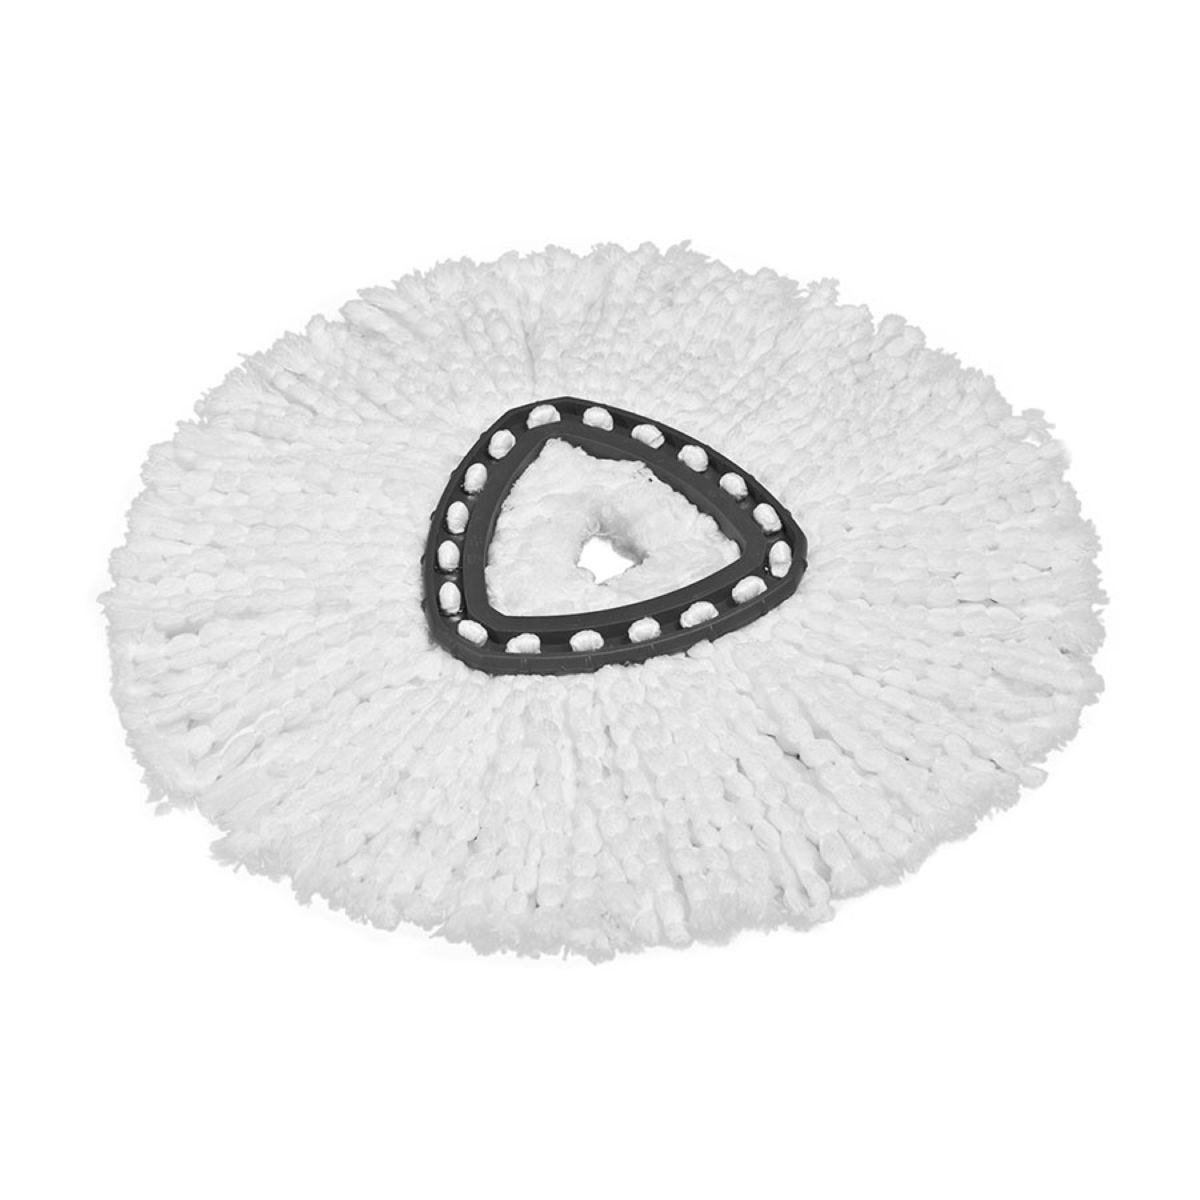 Details about   Vileda Easy Wring and Clean Turbo Mop and Bucket Set or Replacement Mop Head UK 